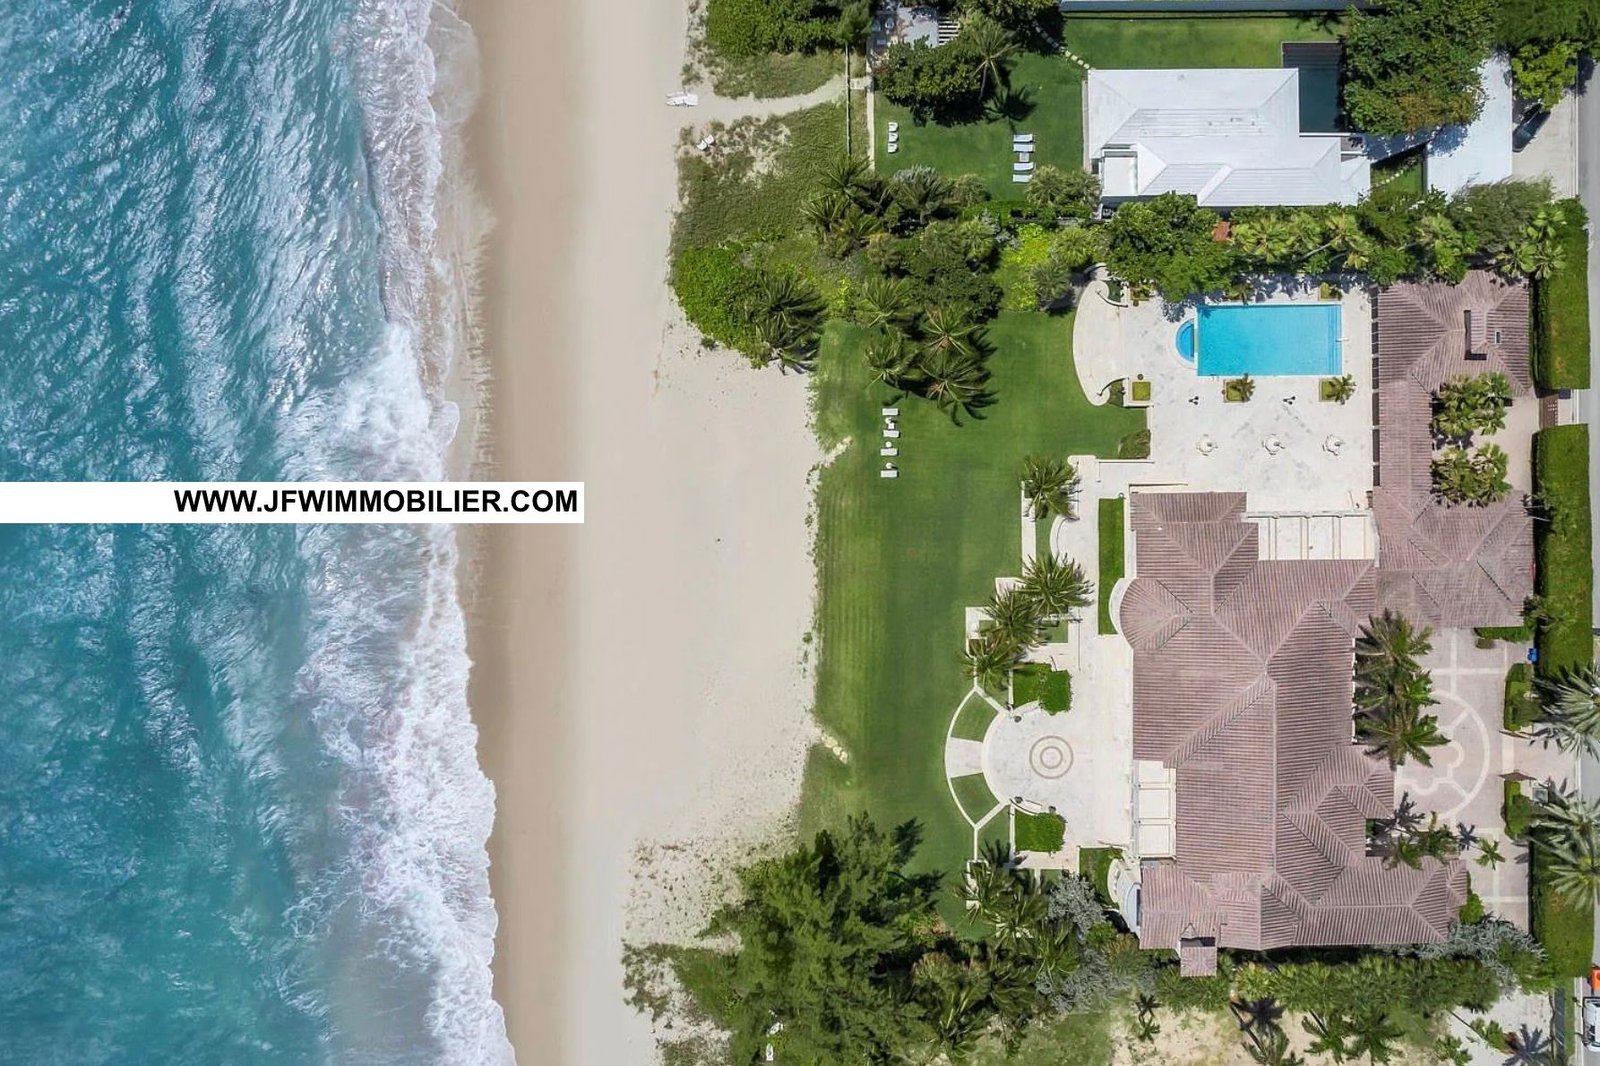 Oceanfront mansion between Miami and Fort Lauderdale. Florida luxury real estate. Prestige.